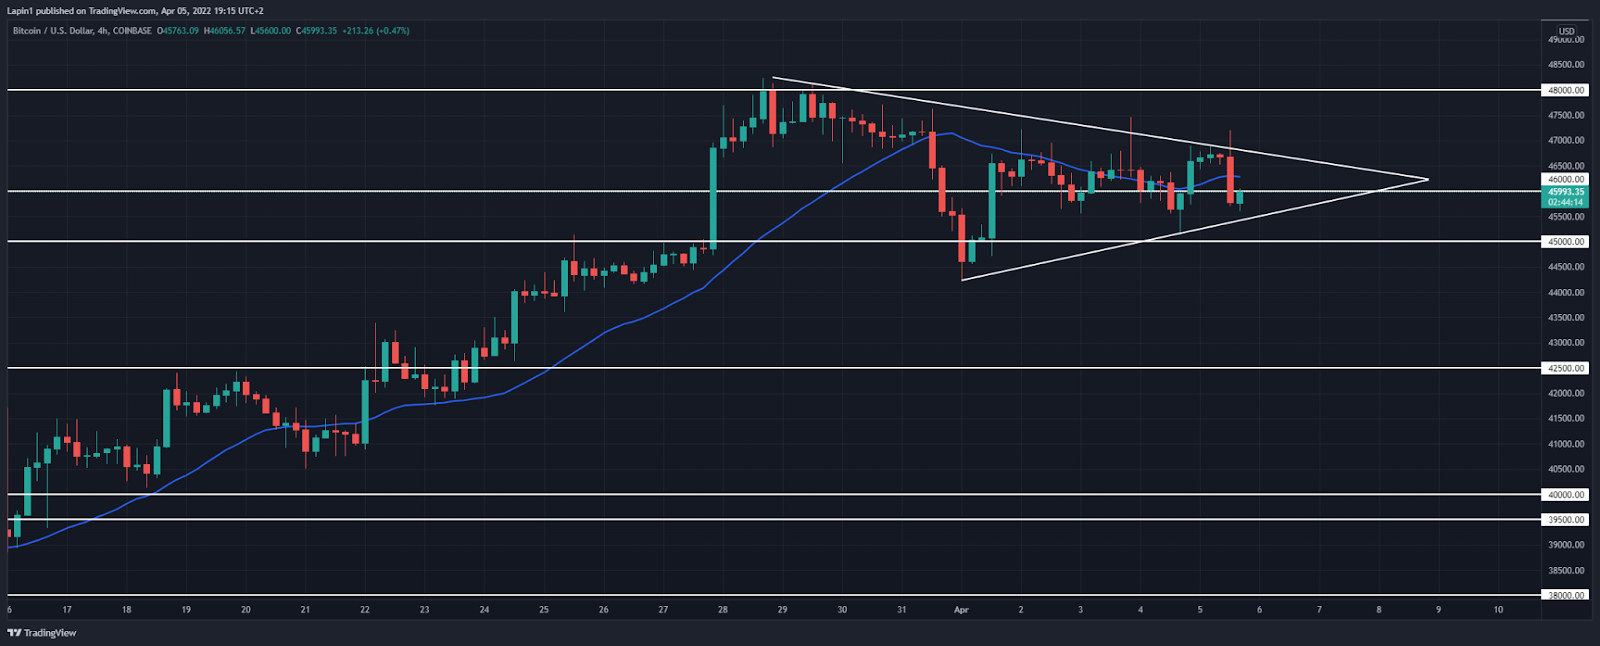 Bitcoin price analysis: BTC forms consolidation around $46,000, a test of upside next?